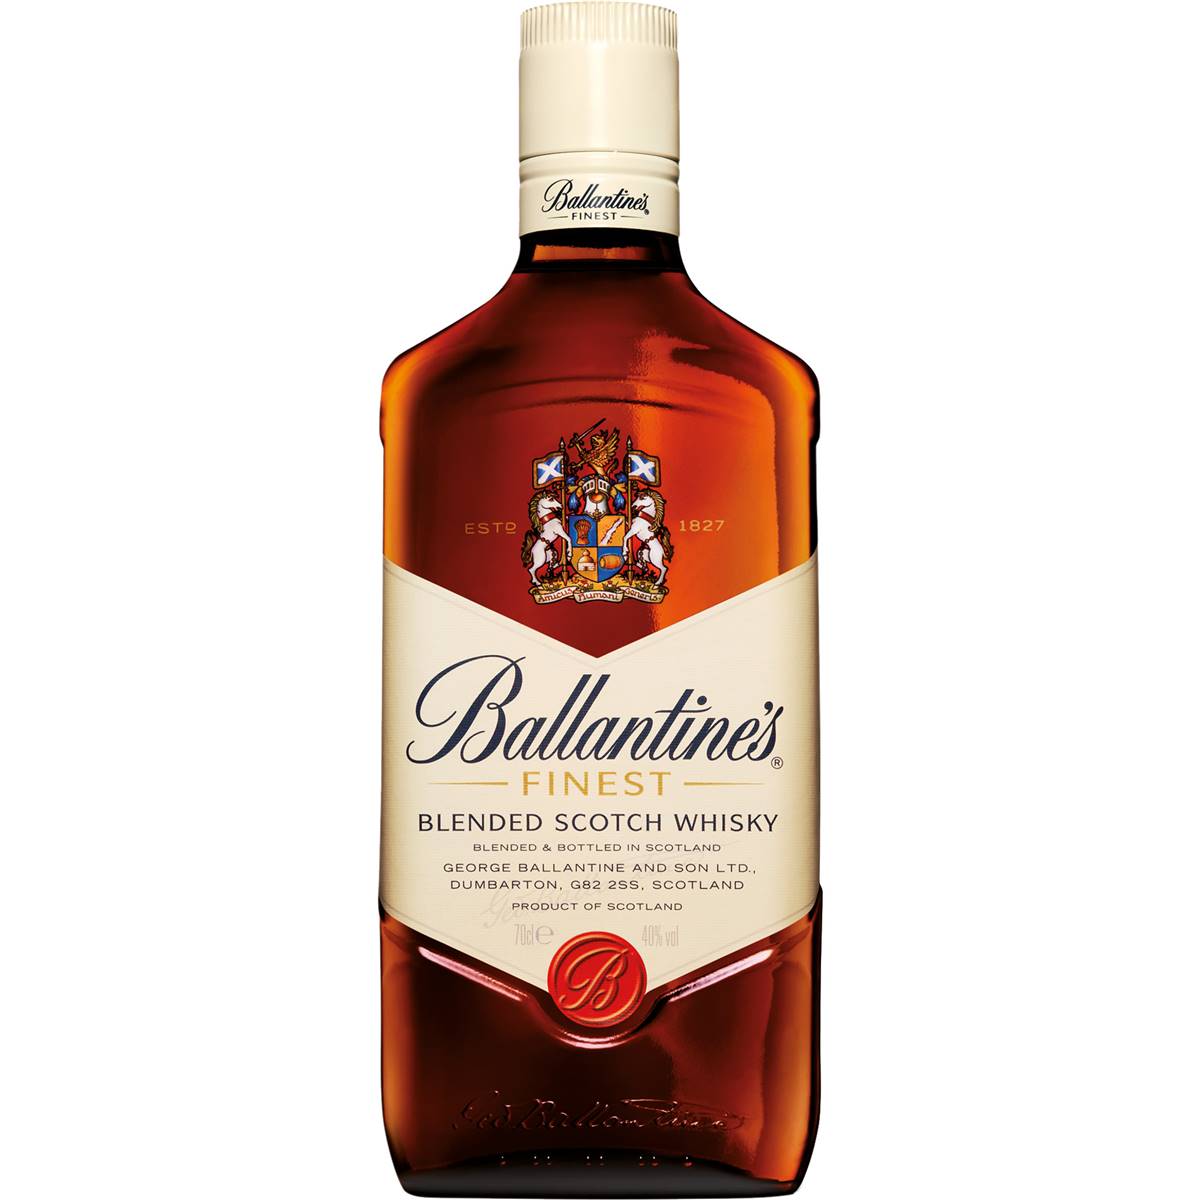 Calories in Ballantine's Finest Blended Scotch Whisky